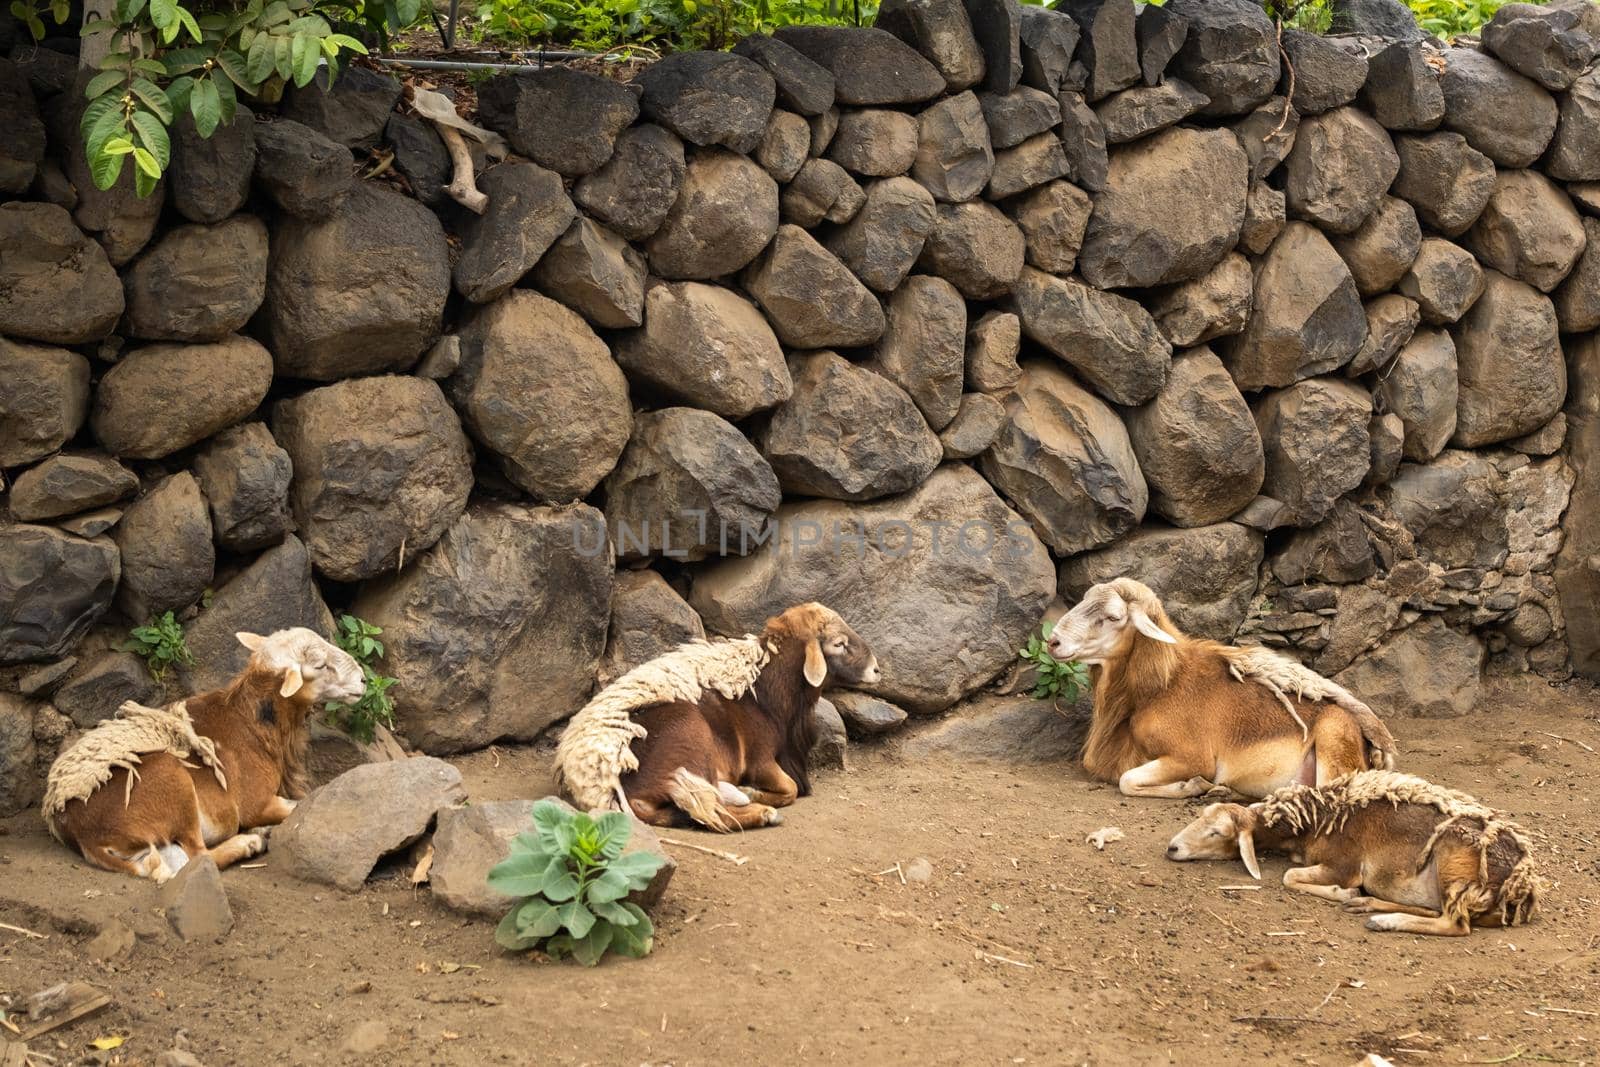 Sheep mostly rest on the island of Tenerife. Sheep in the Canary Islands.